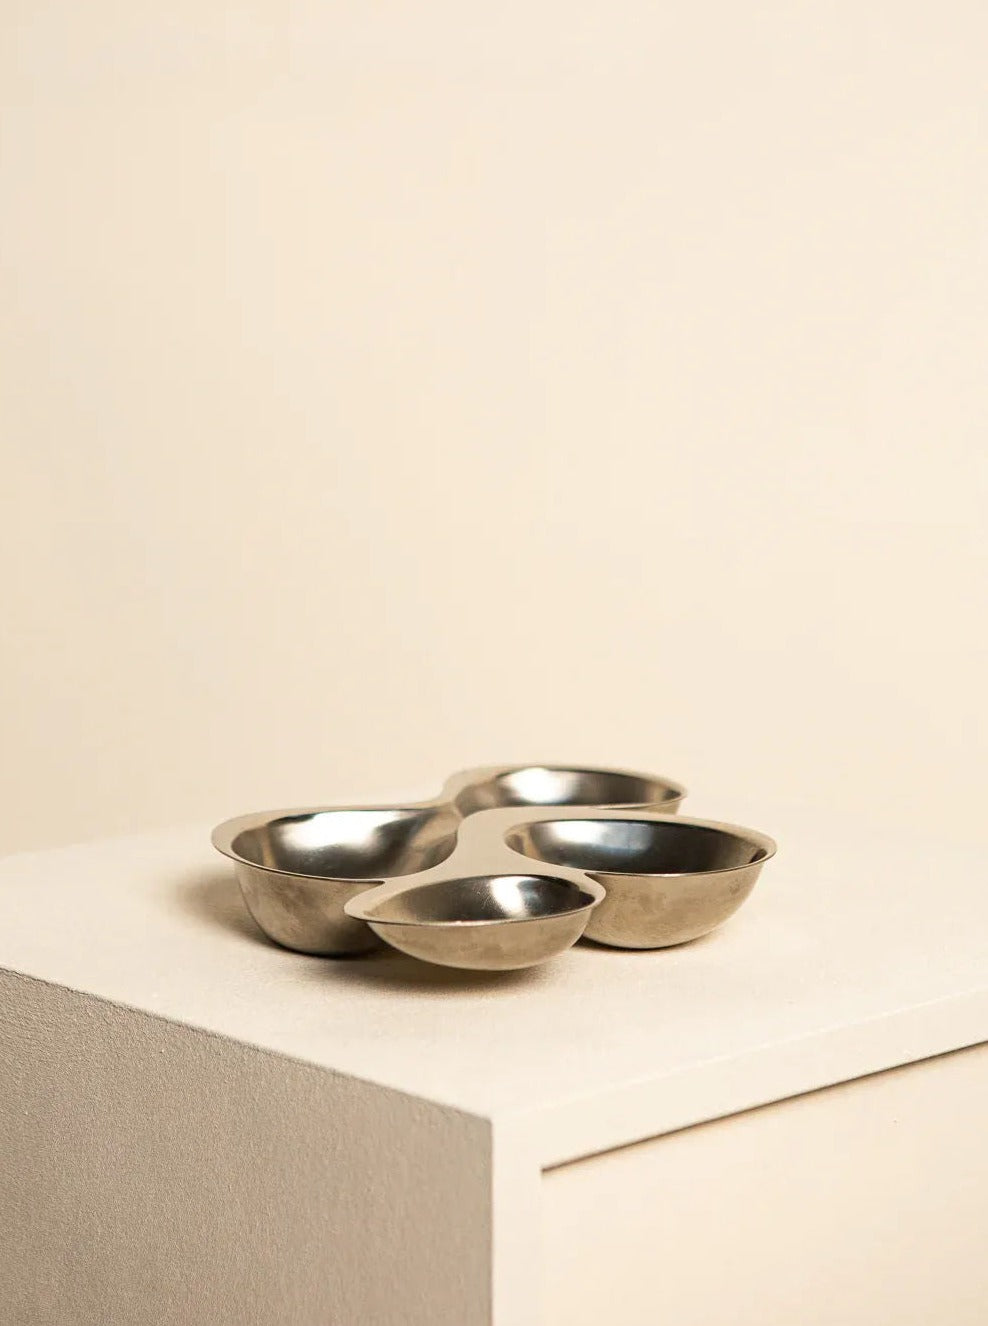 Stainless Steel Vide Poche by Ron Arad for Alessi